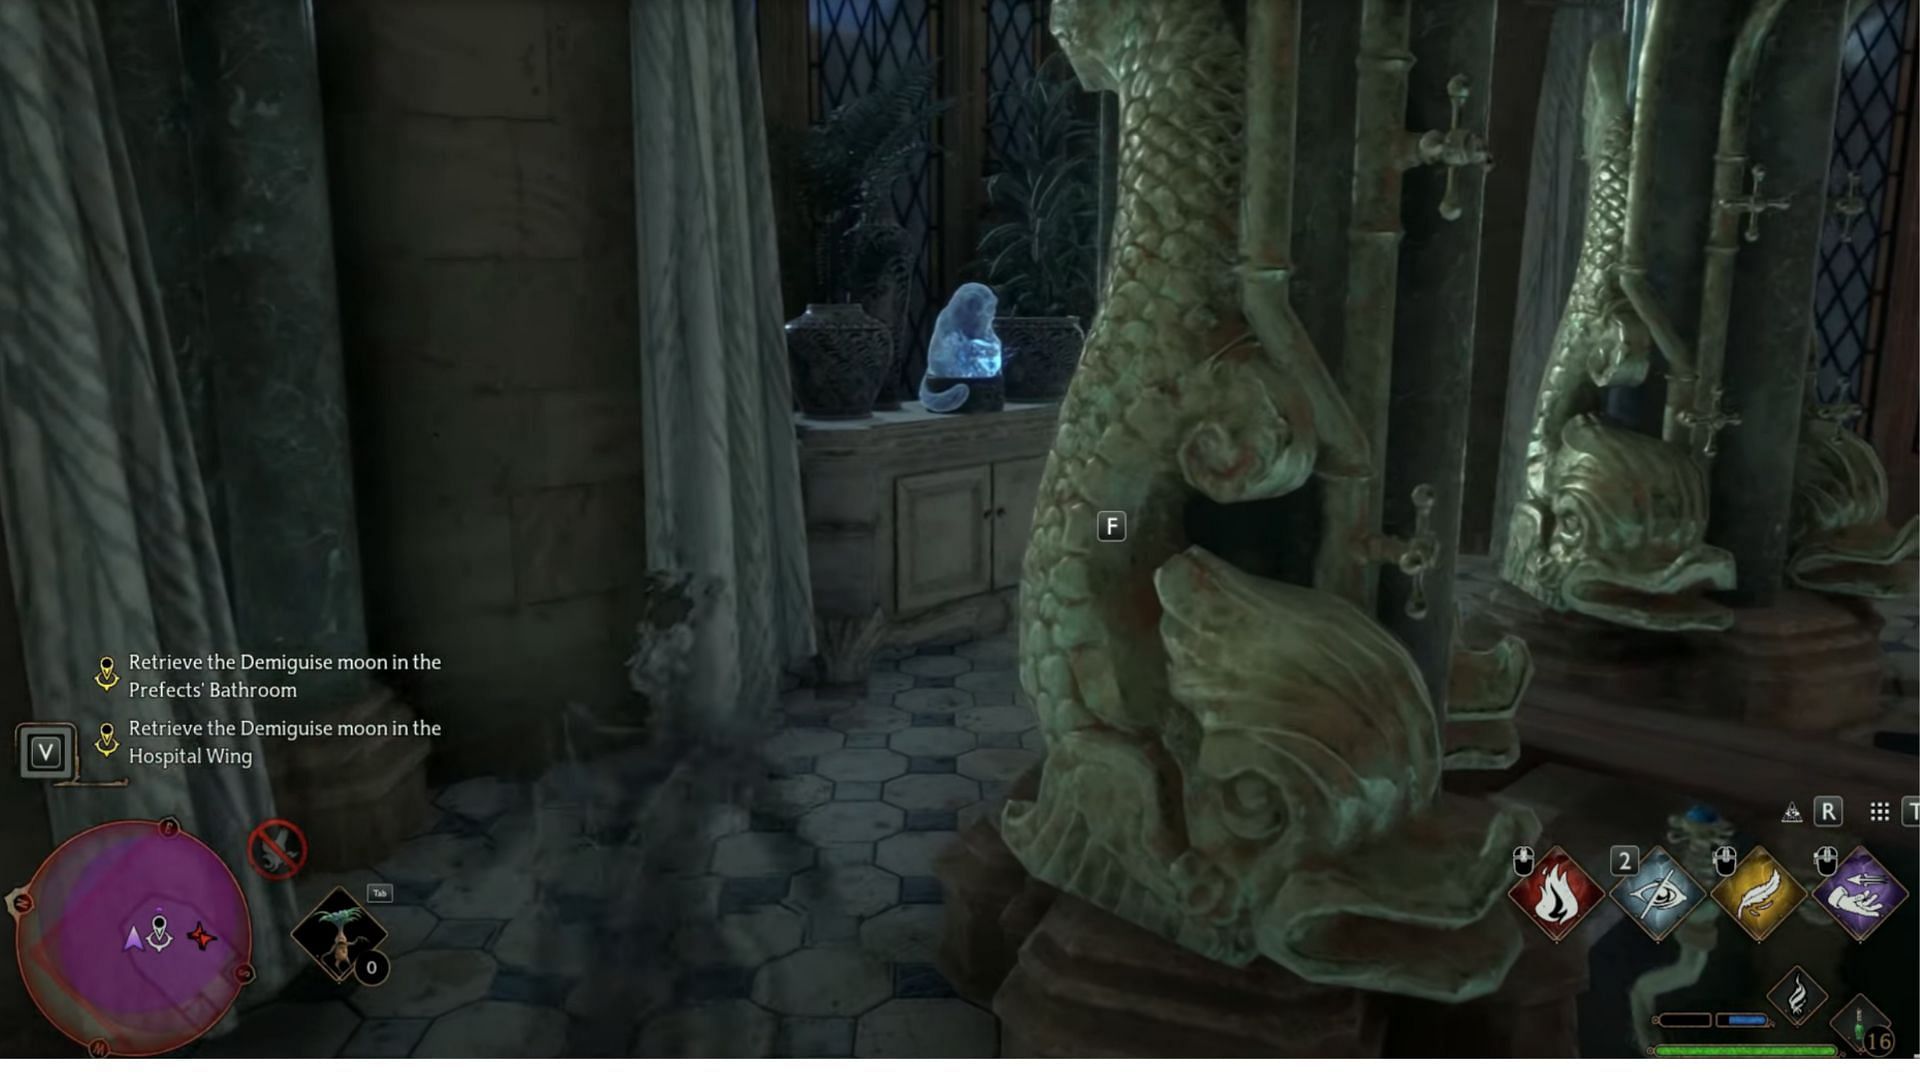 !st Demiguise Moon (Image via WB Games and YouTube/Gamerpillar)